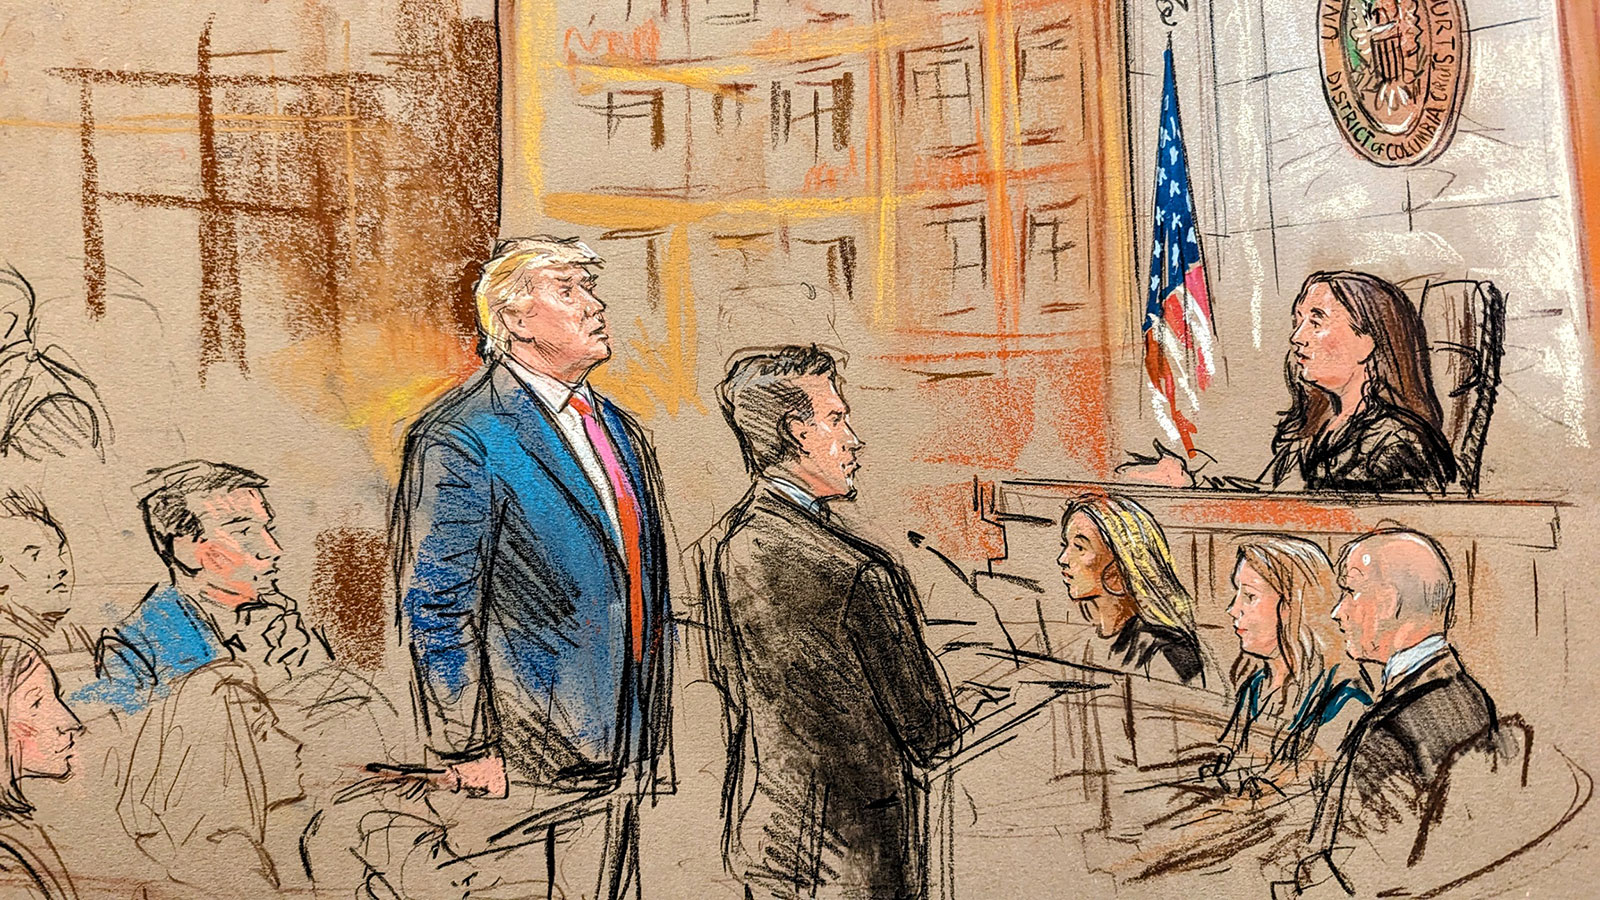 A courtroom sketch captures the moment when Trump pleaded “not guilty.”